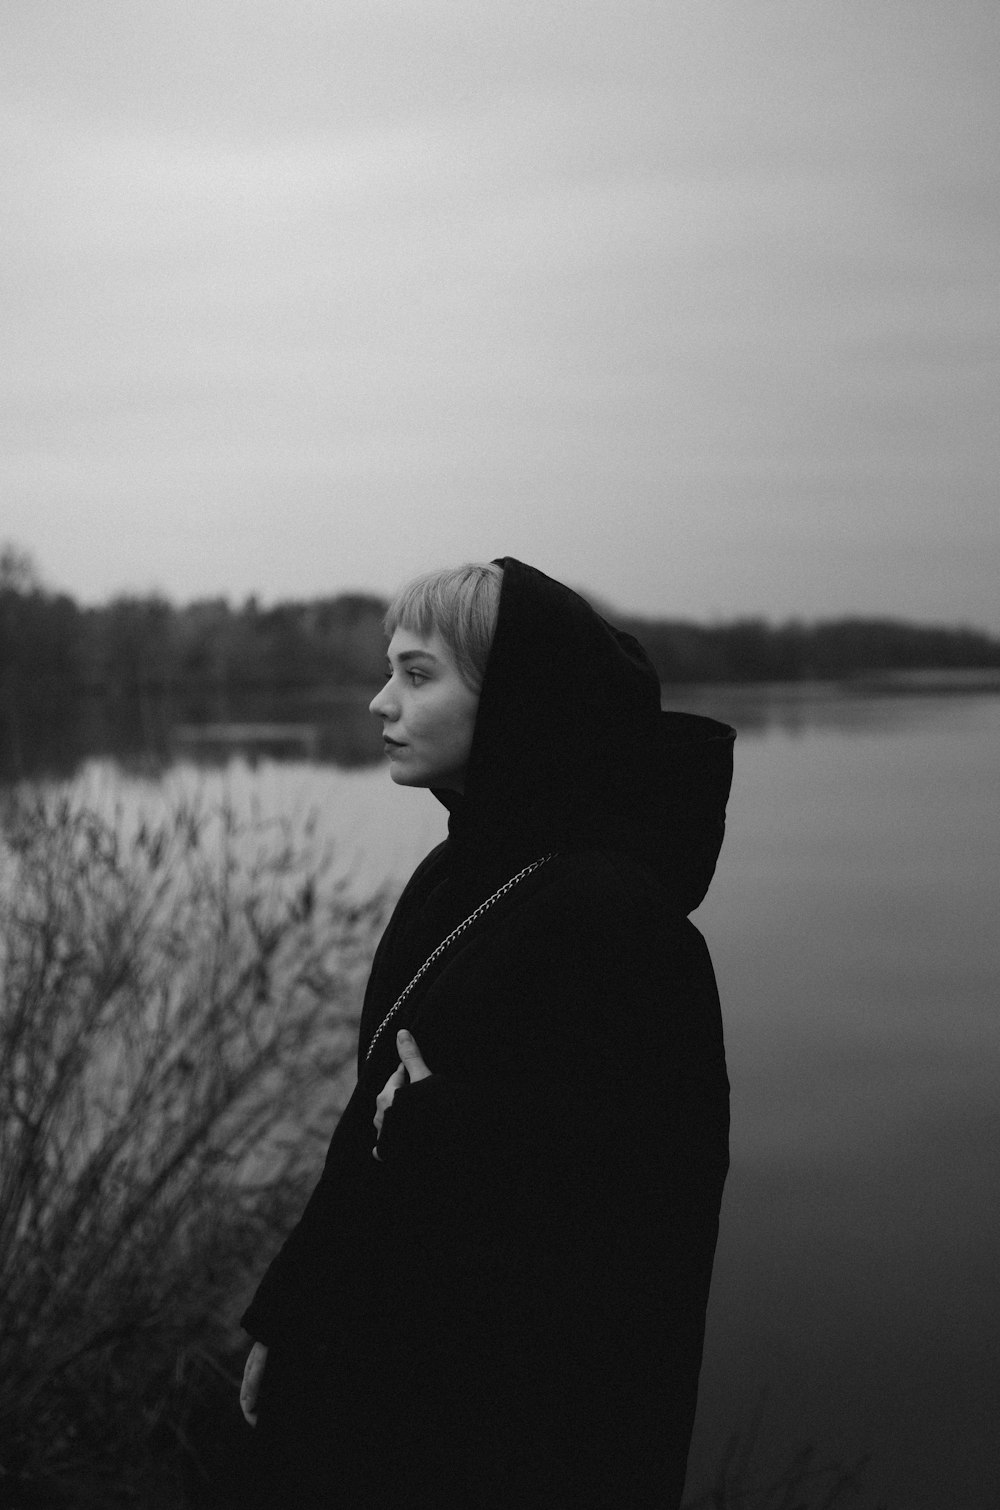 a black and white photo of a person near a body of water